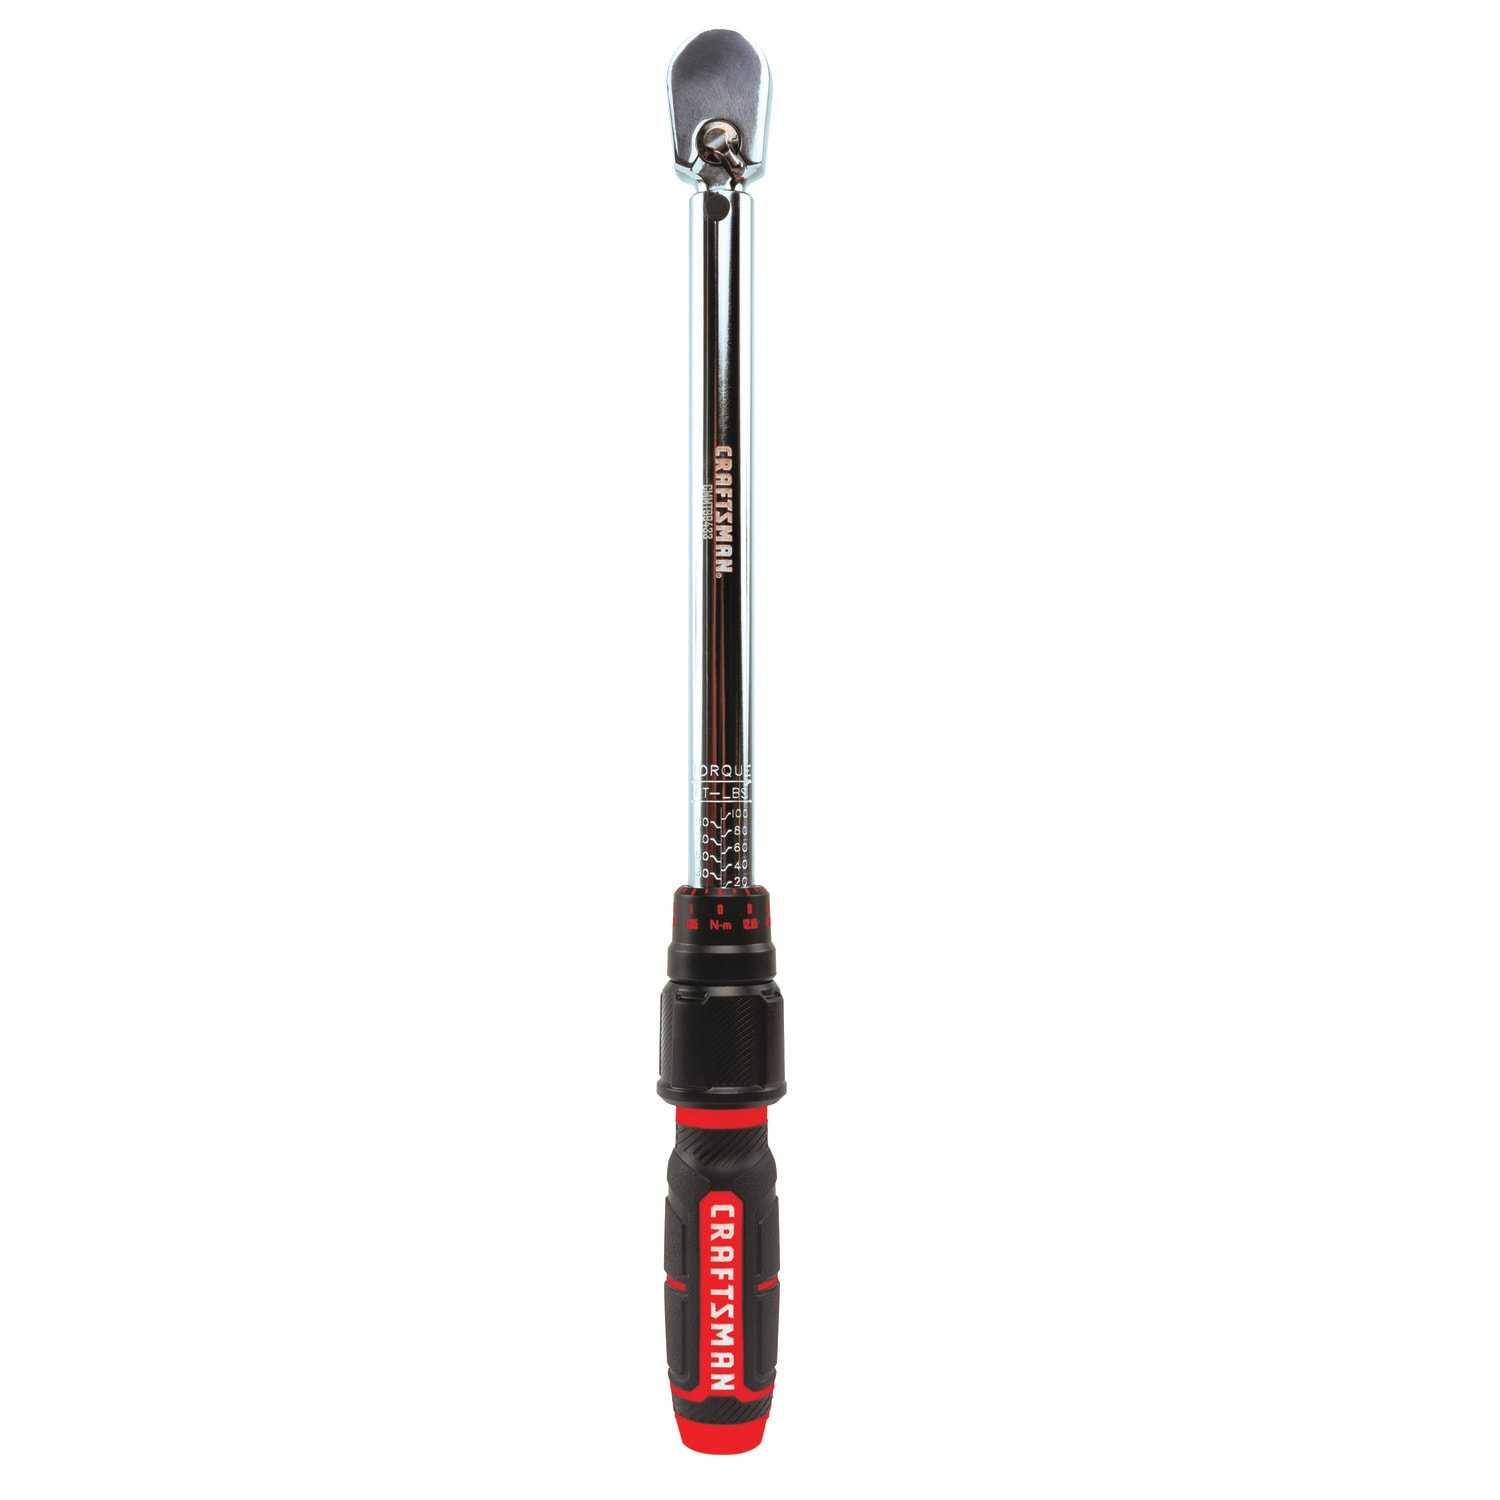 CRAFTSMAN 3/8-in Drive Click Torque Wrench (20-ft lb to 100-ft lb) | CMMT99433